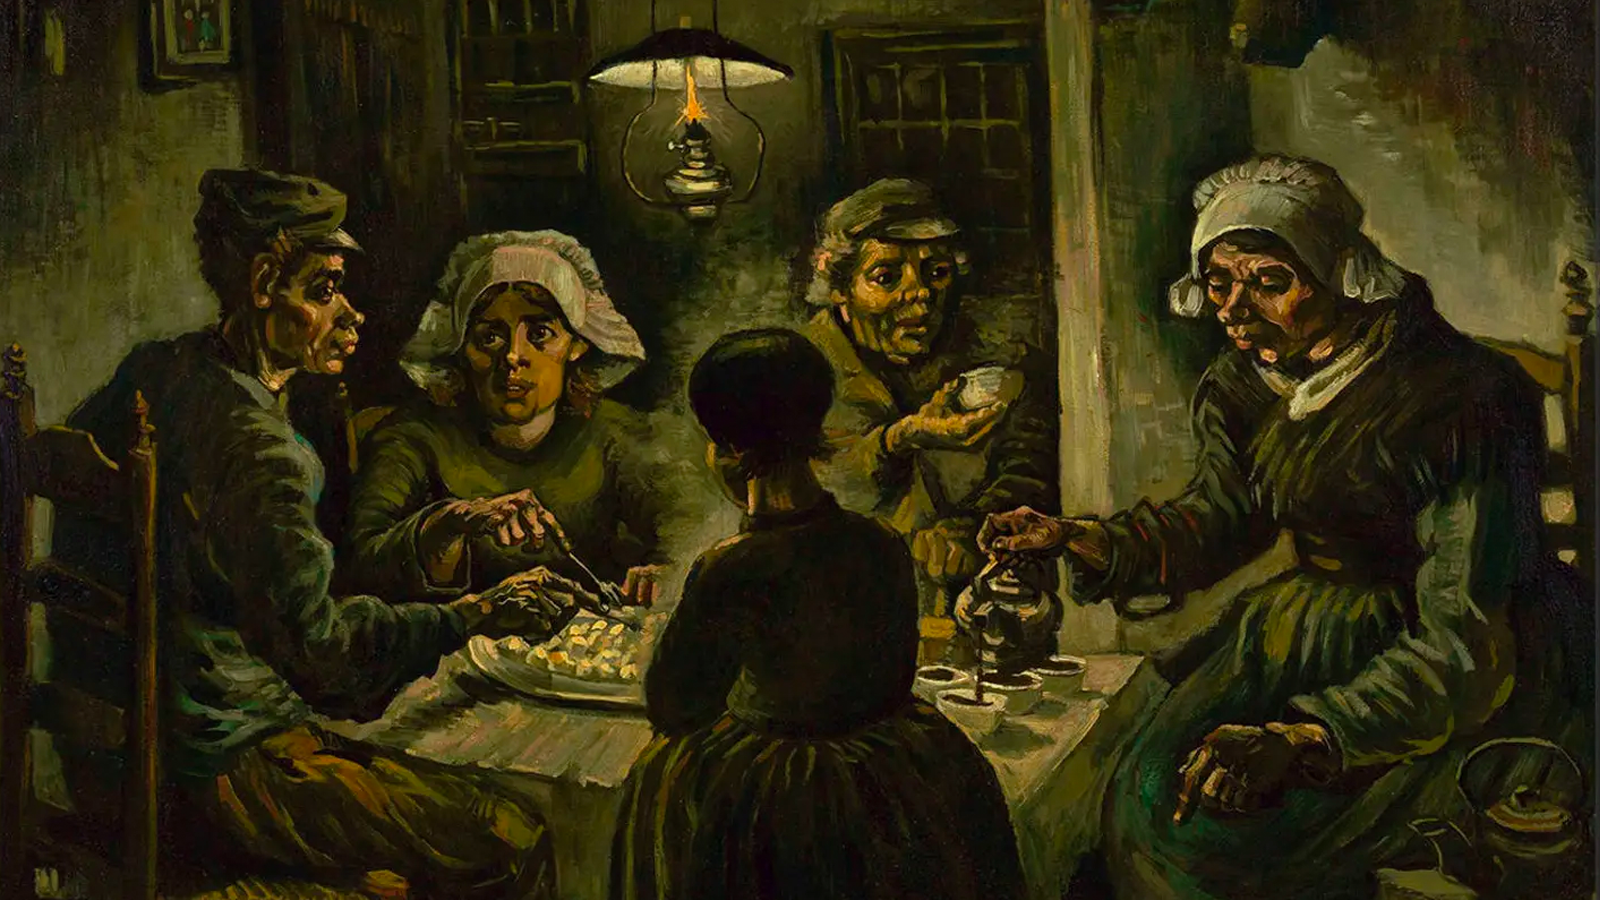 The picture is the Vincent Van Gogh painting called the Potato Eaters from 1885. It depicts a group of people sat around a table, eating potatoes.